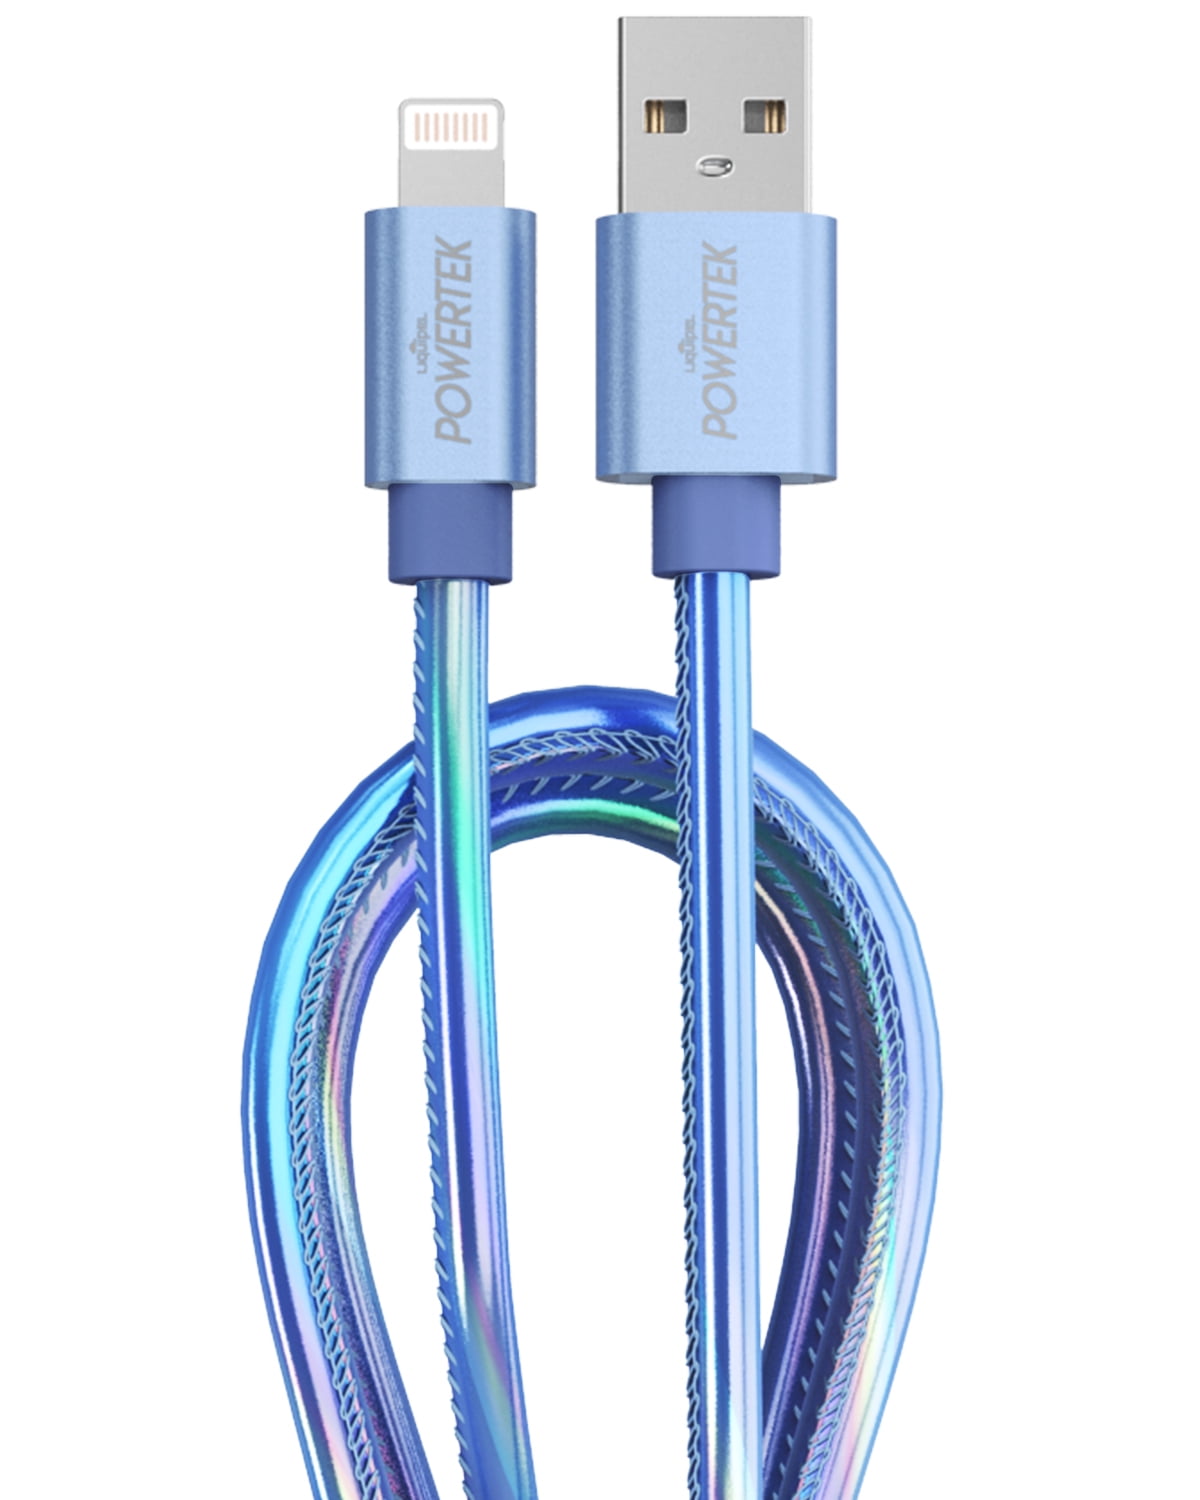 Liquipel Powertek iPhone Charger Cable [MFI Certified], Fast Charging 6ft  Lightning to USB Cord Adapter, Compatible for iPad, Metallic Shine Electric  Blue 